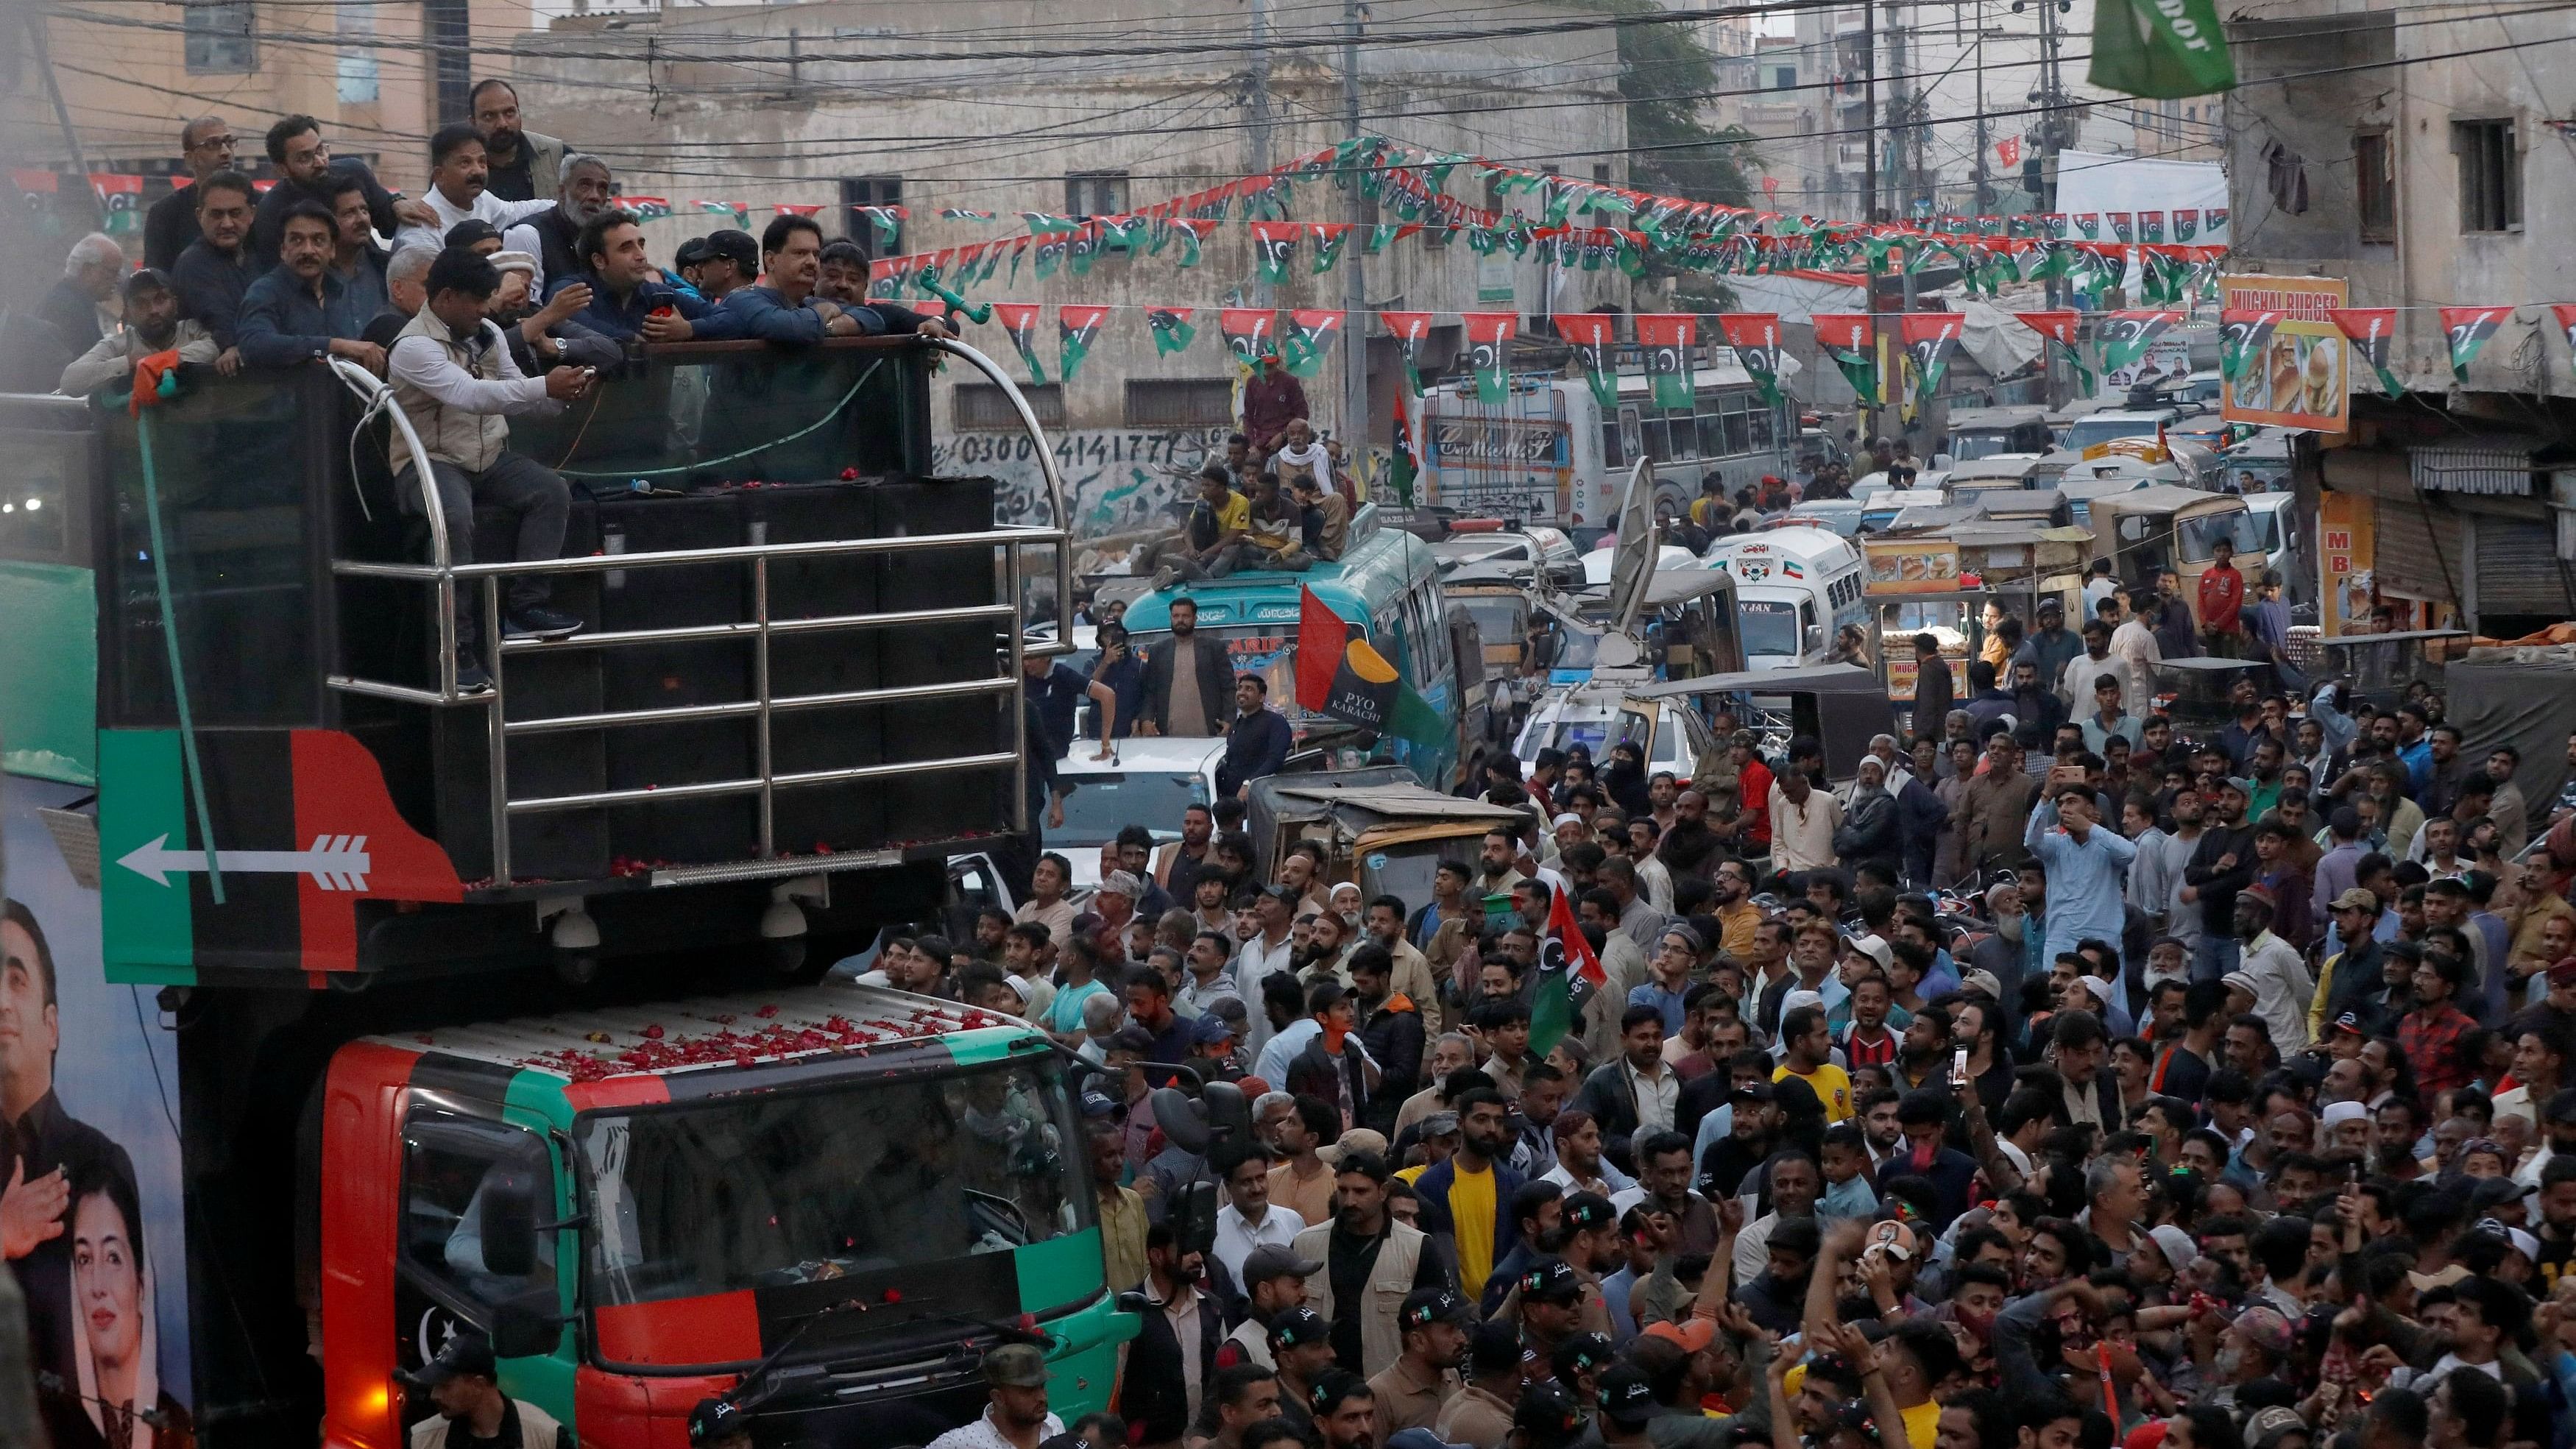 <div class="paragraphs"><p>Supporters of Bilawal Bhutto Zardari, Chairman of the Pakistan Peoples Party (PPP), gather around his vehicle during an election campaign rally, ahead of the general elections, in Karachi.</p></div>